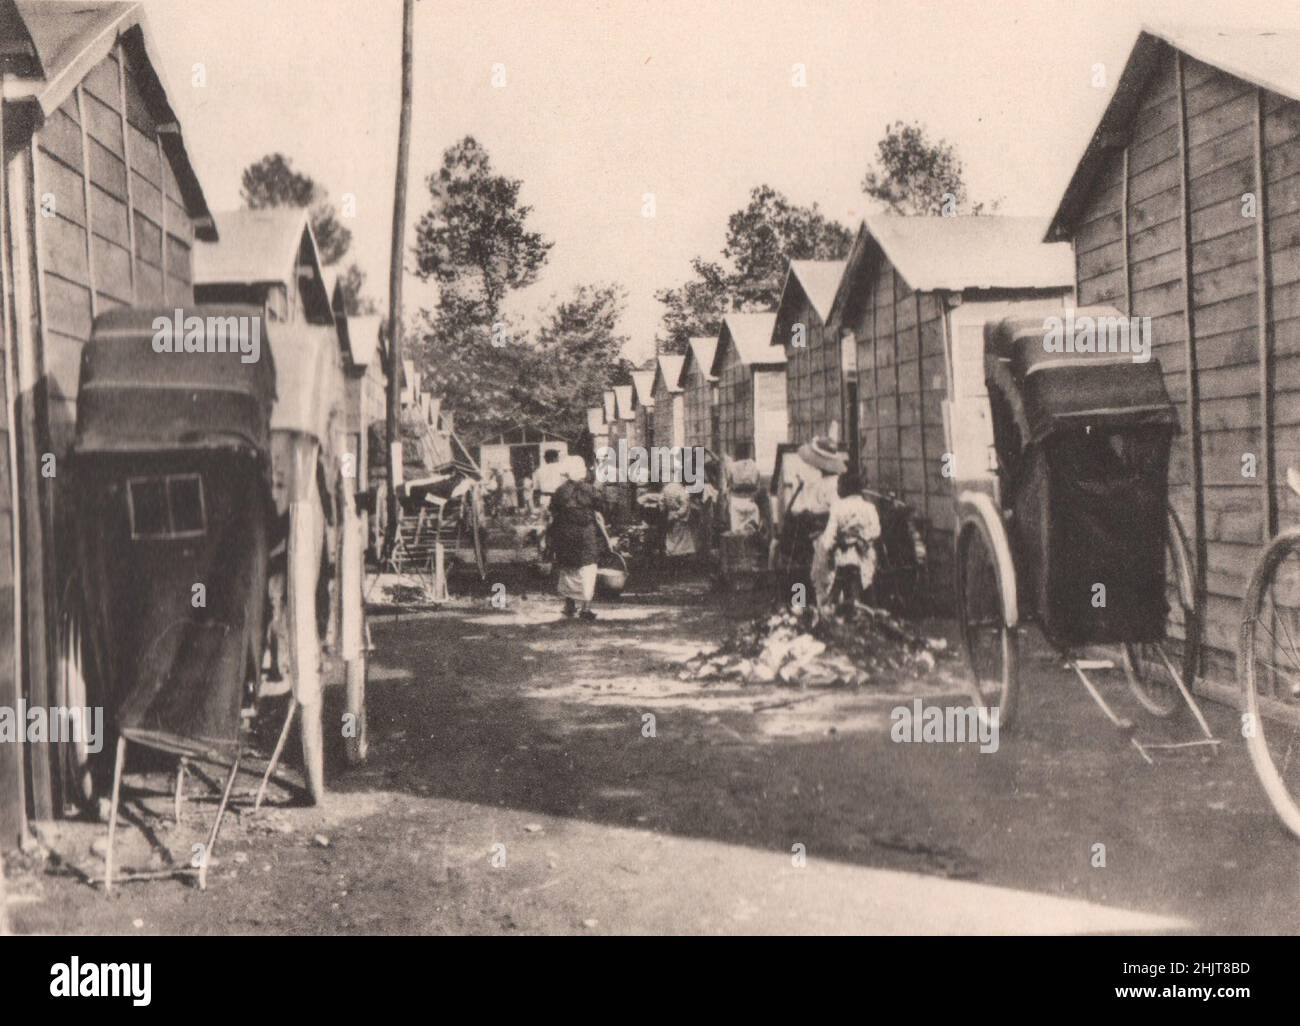 Japan Earthquake 1923: The refugees' colony at Hibiya Park (first ten group sheds erected soon after the disaster) Stock Photo